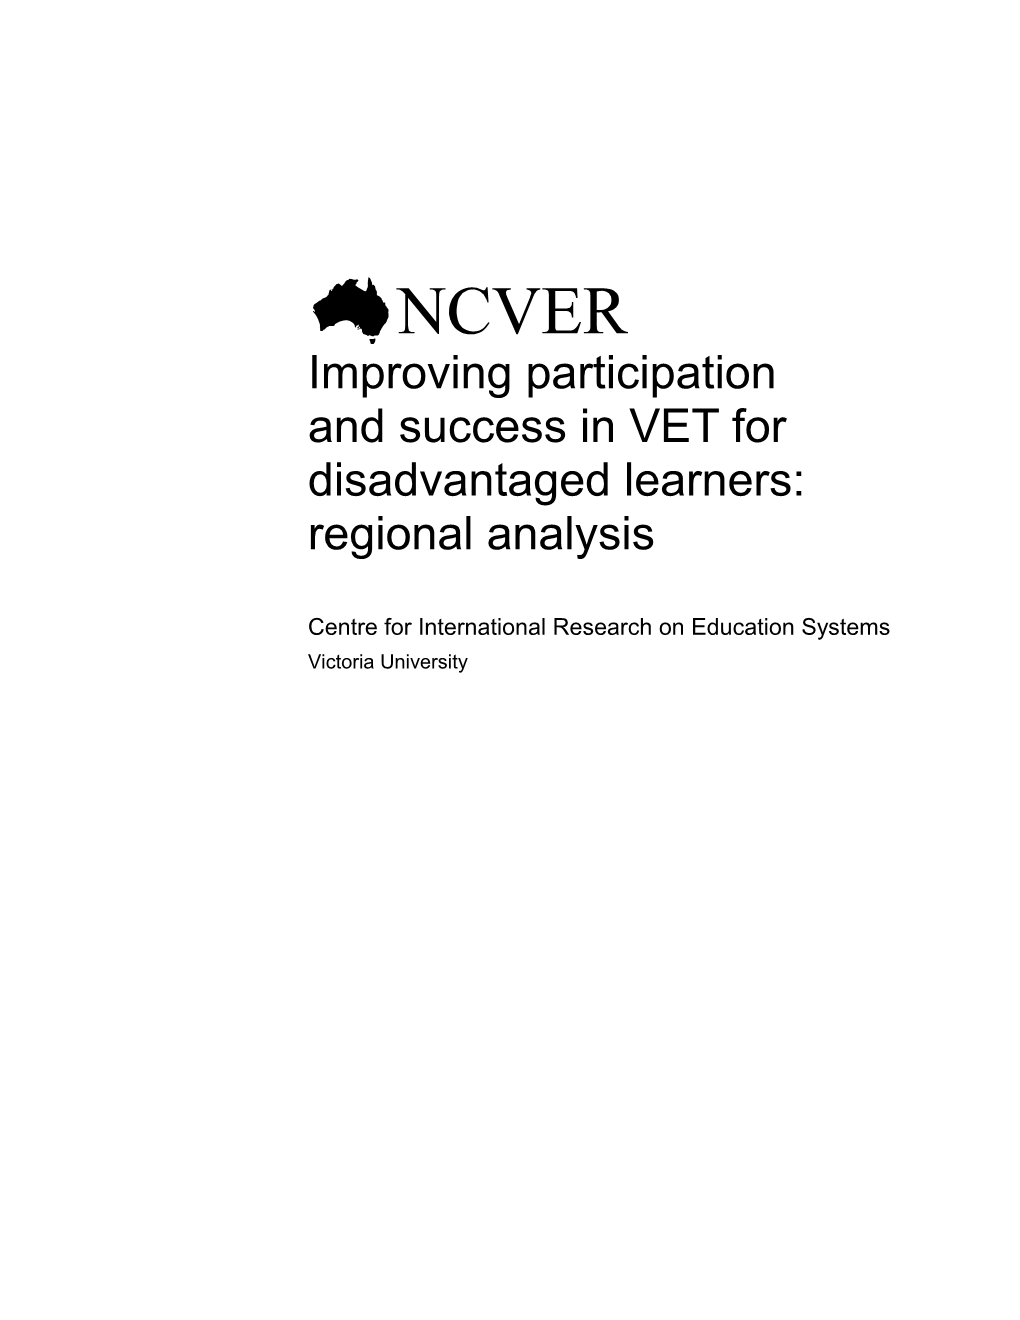 And Success in VET for Disadvantaged Learners: Regional Analysis